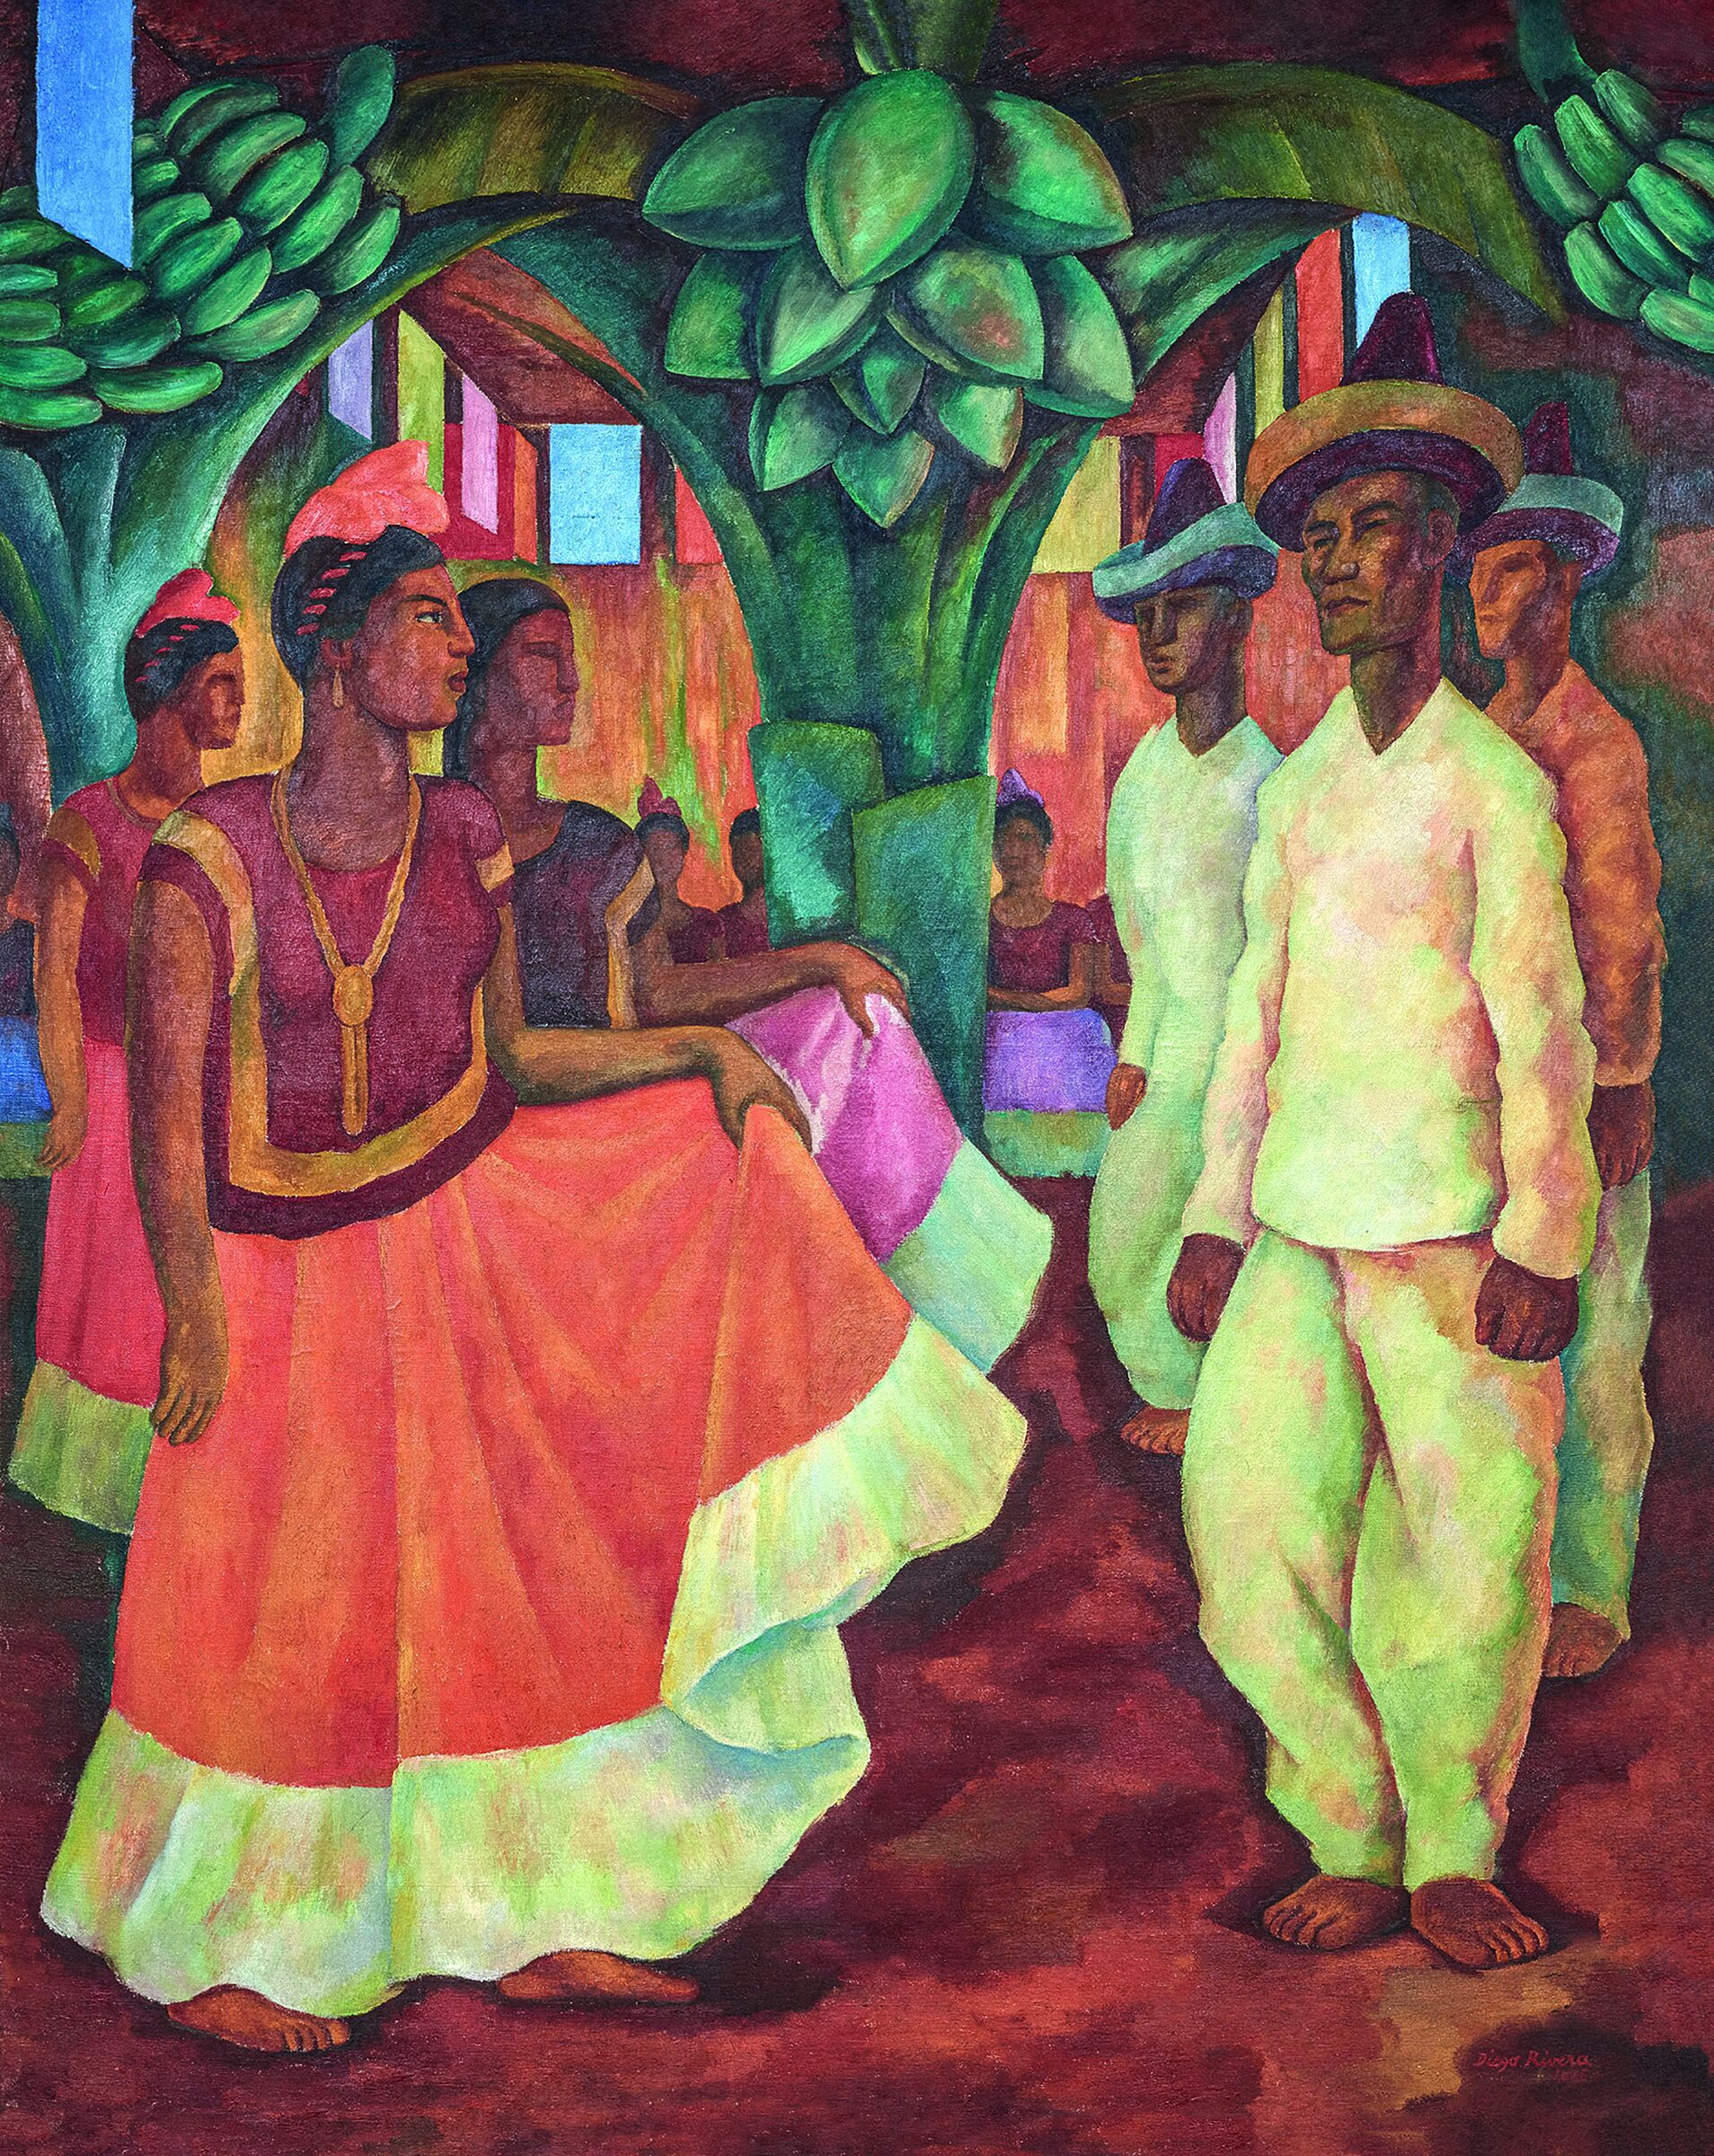 A painting depicting a group of Mexican dancers.